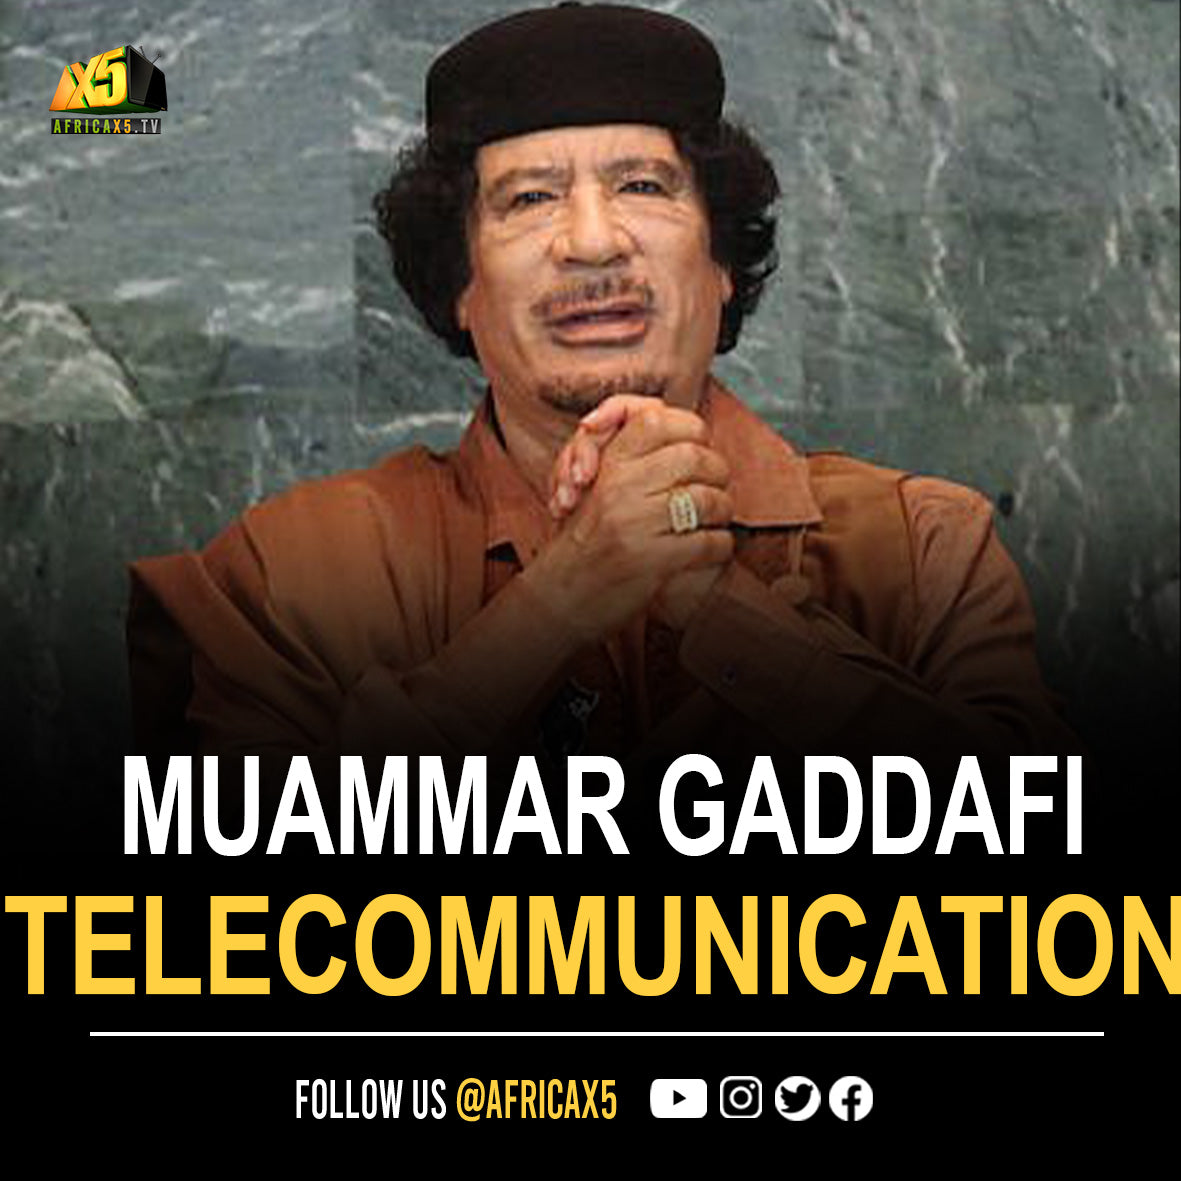 Africa enjoys unlimited telecommunication services because of Gaddafi.